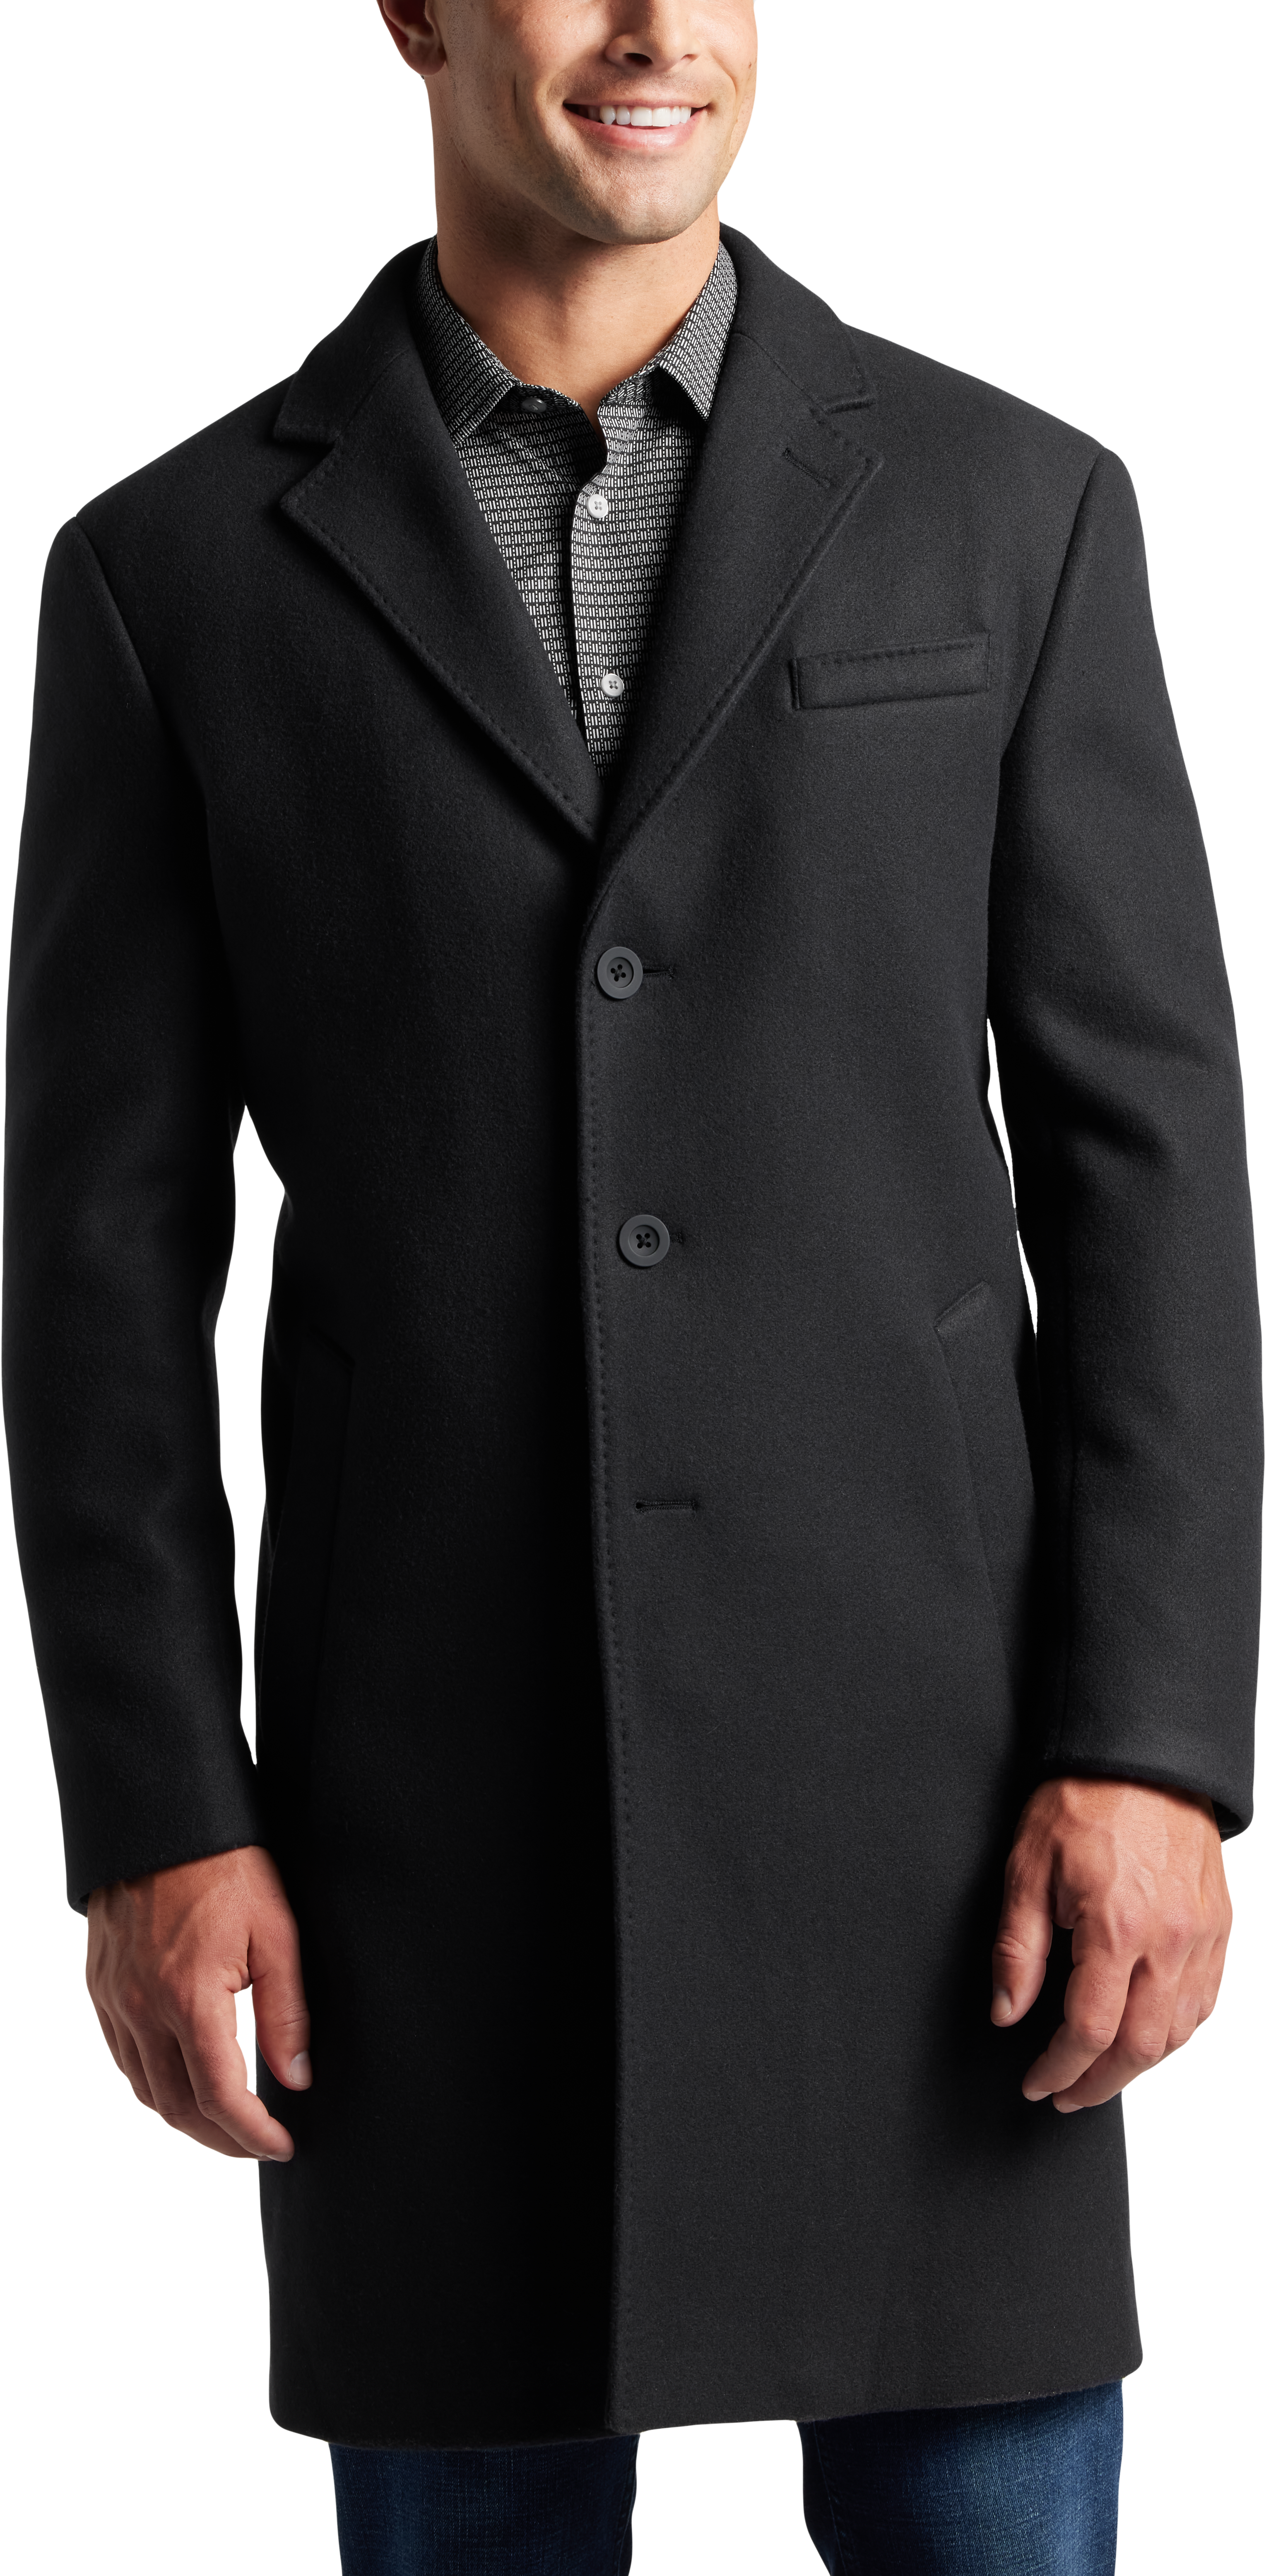 Awearness Kenneth Cole Men's Slim Fit Topcoat Black - Size: Large